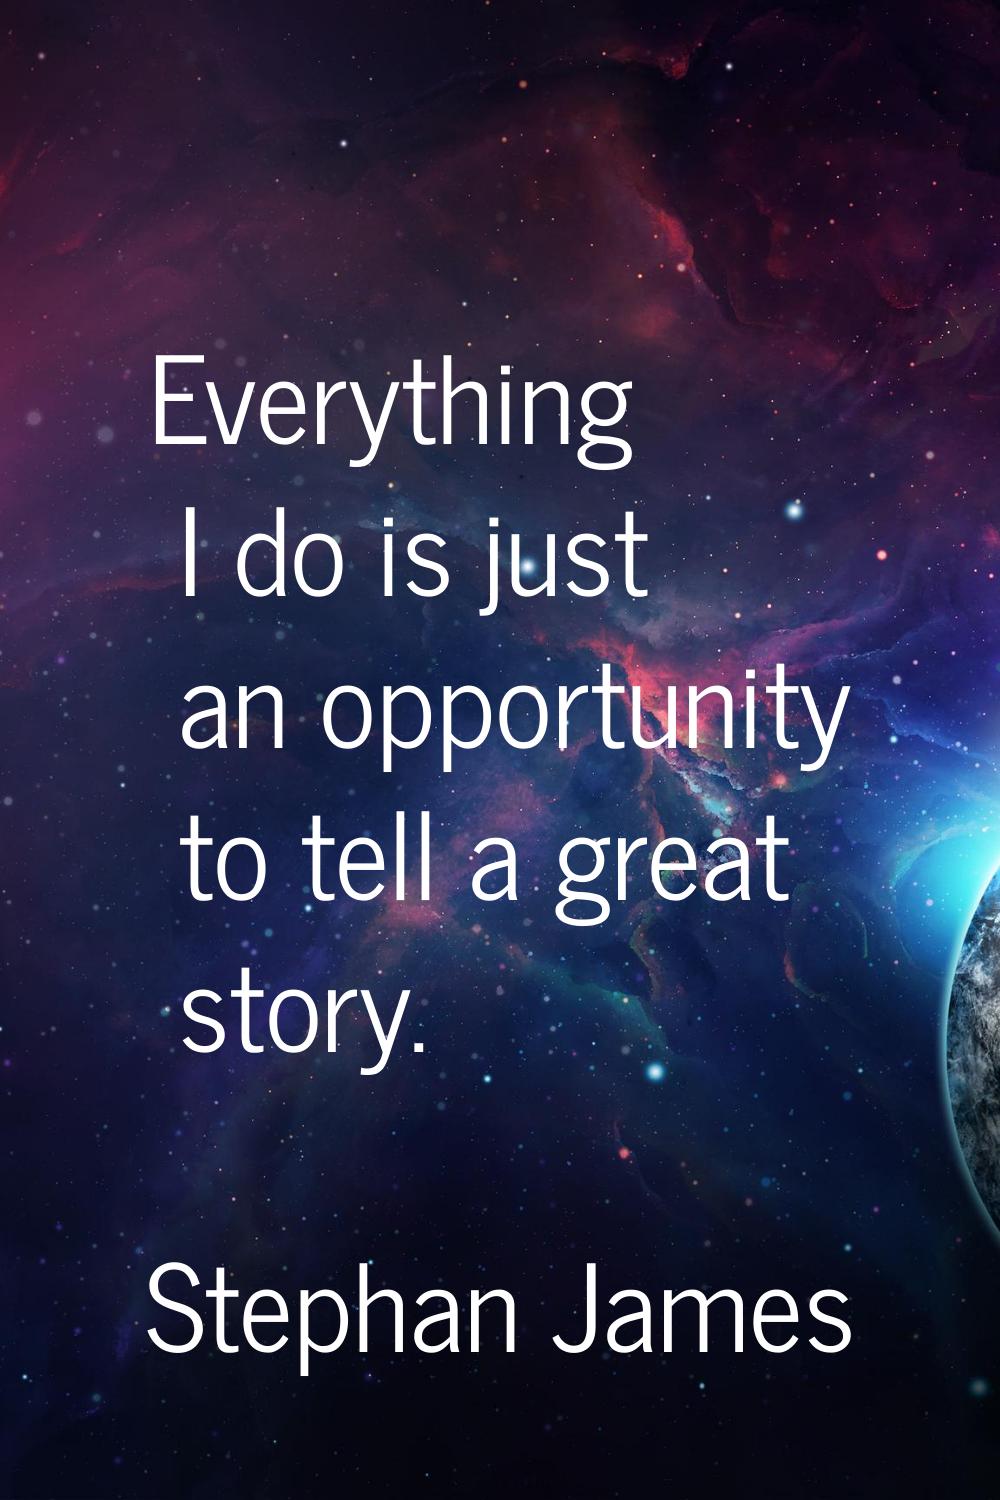 Everything I do is just an opportunity to tell a great story.